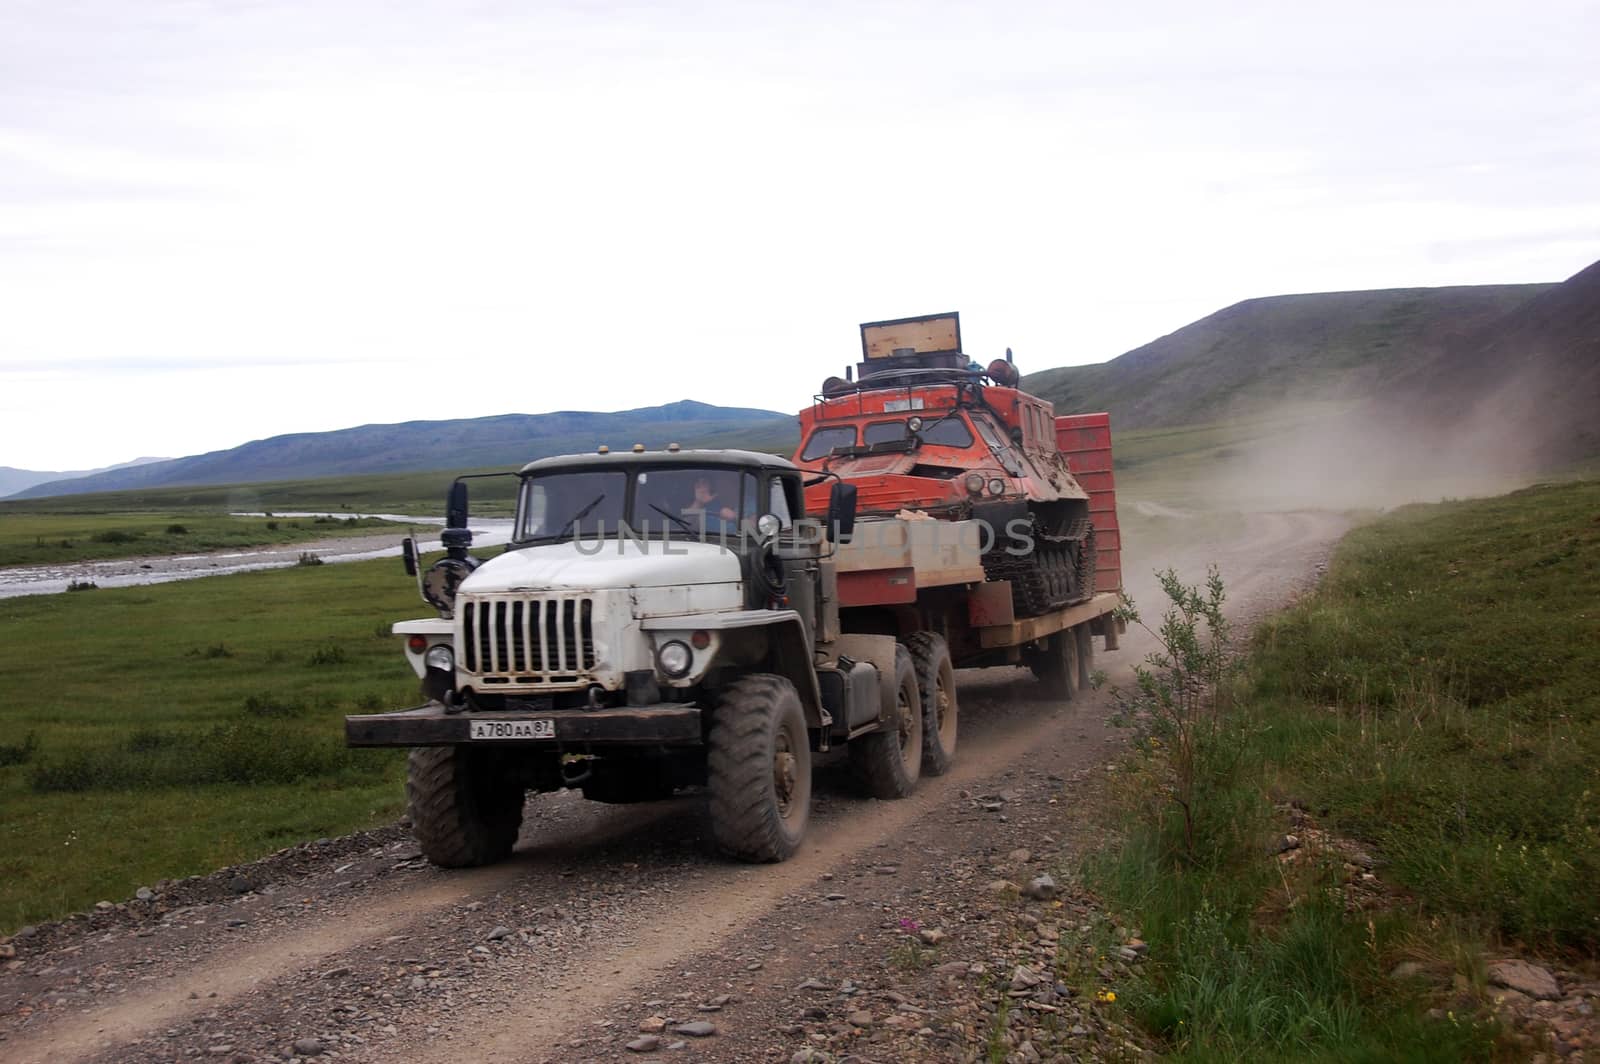 Truck carries all-terrain tracked vehicle at gravel road tundra area, Chukotka, Russia